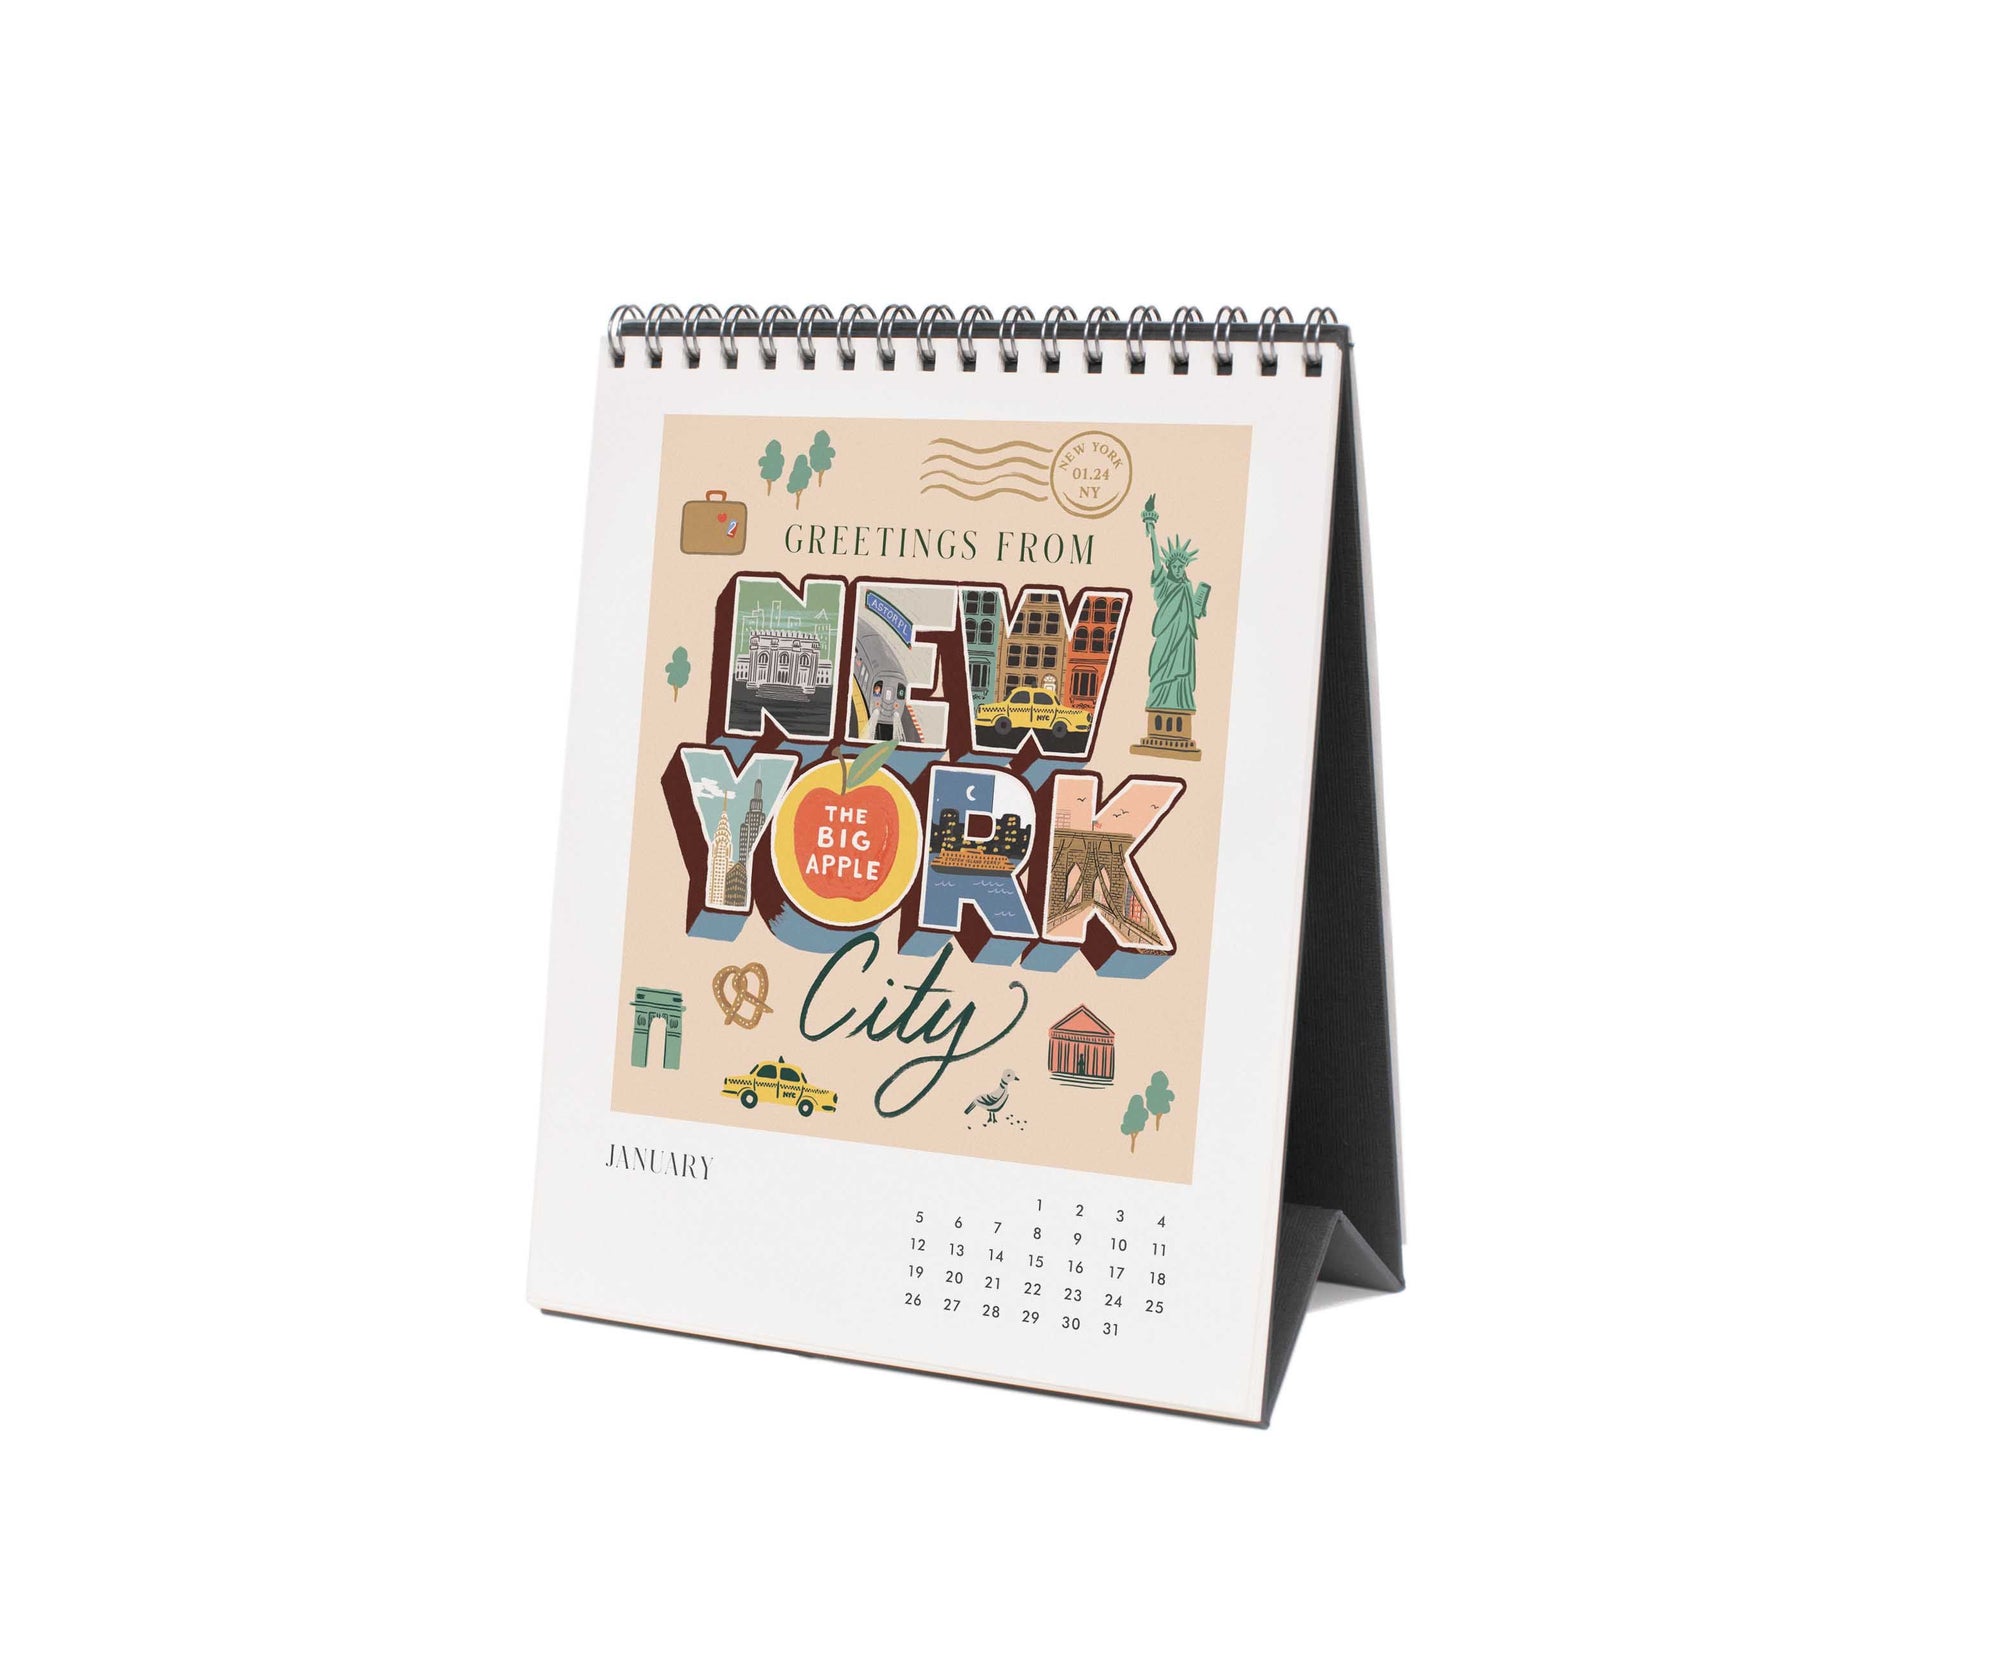 2025 Greetings from Around the World Desk Calendar